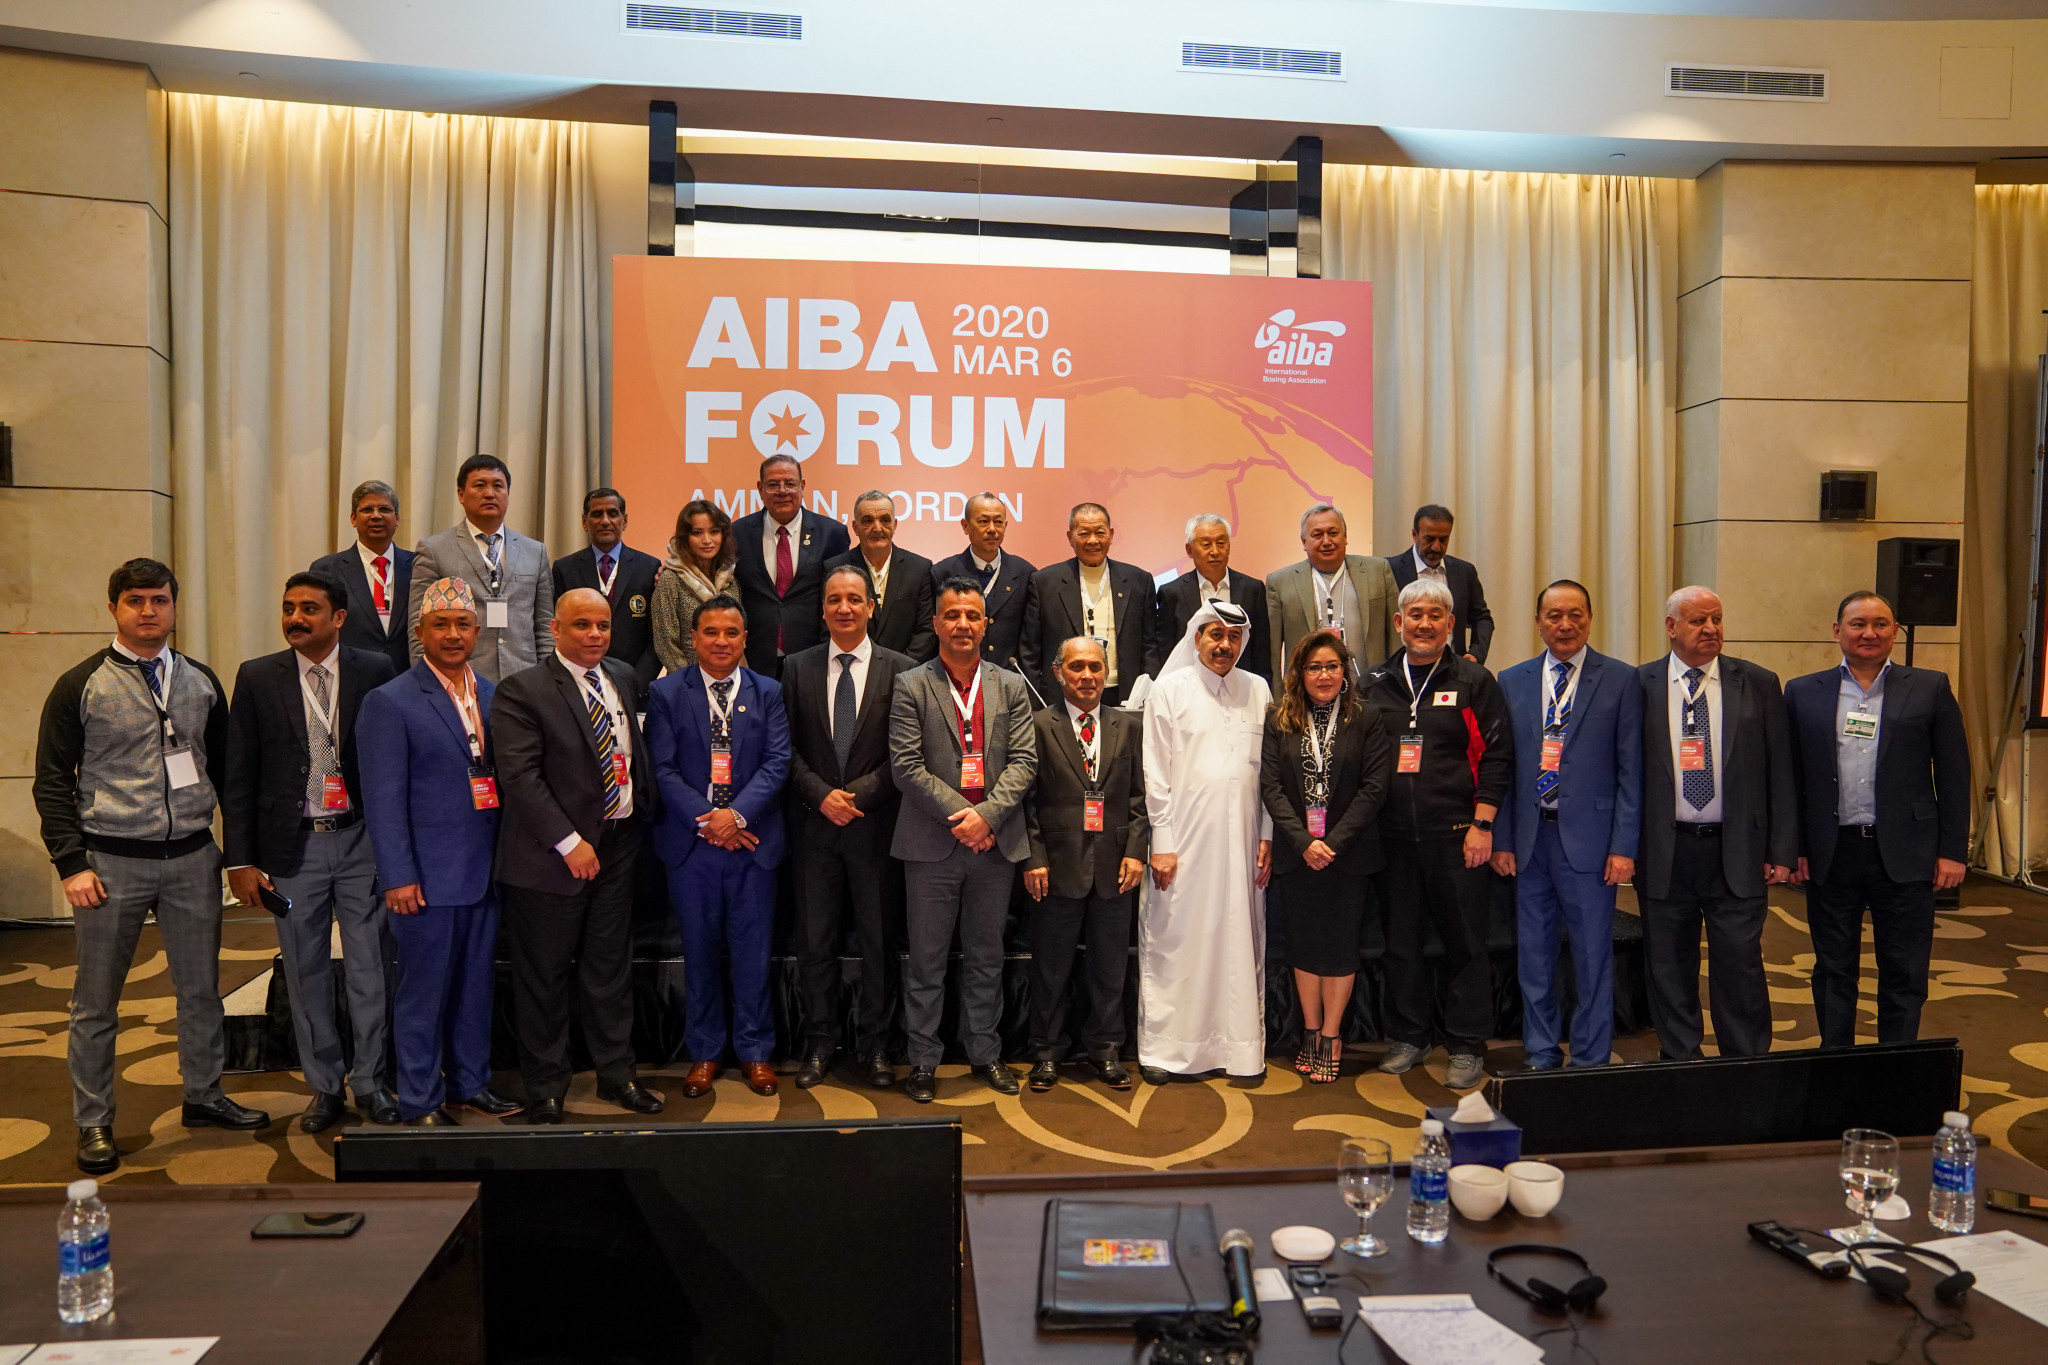 Umar Kremlev devised the AIBA Forums, which aim to create a dialogue in the boxing world ©AIBA